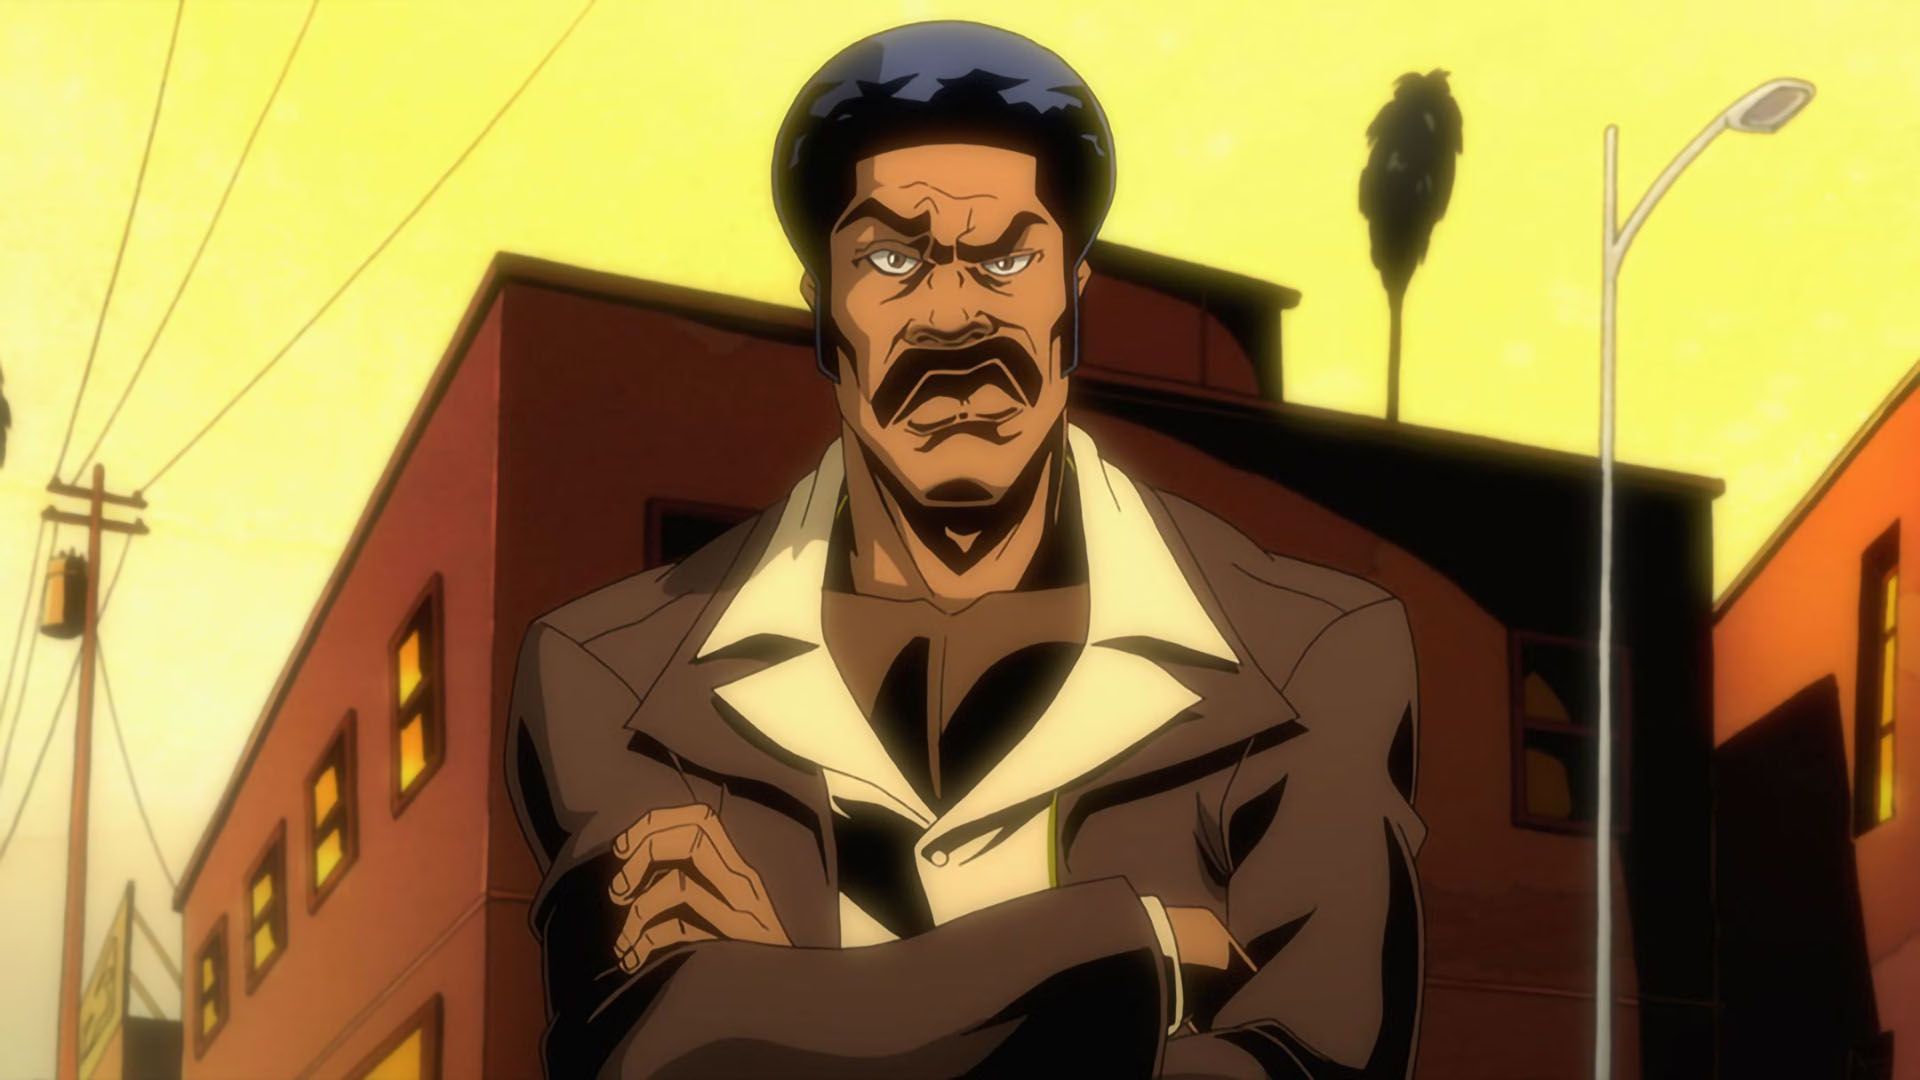 Black Dynamite revolves around the everyday lives of a heroic